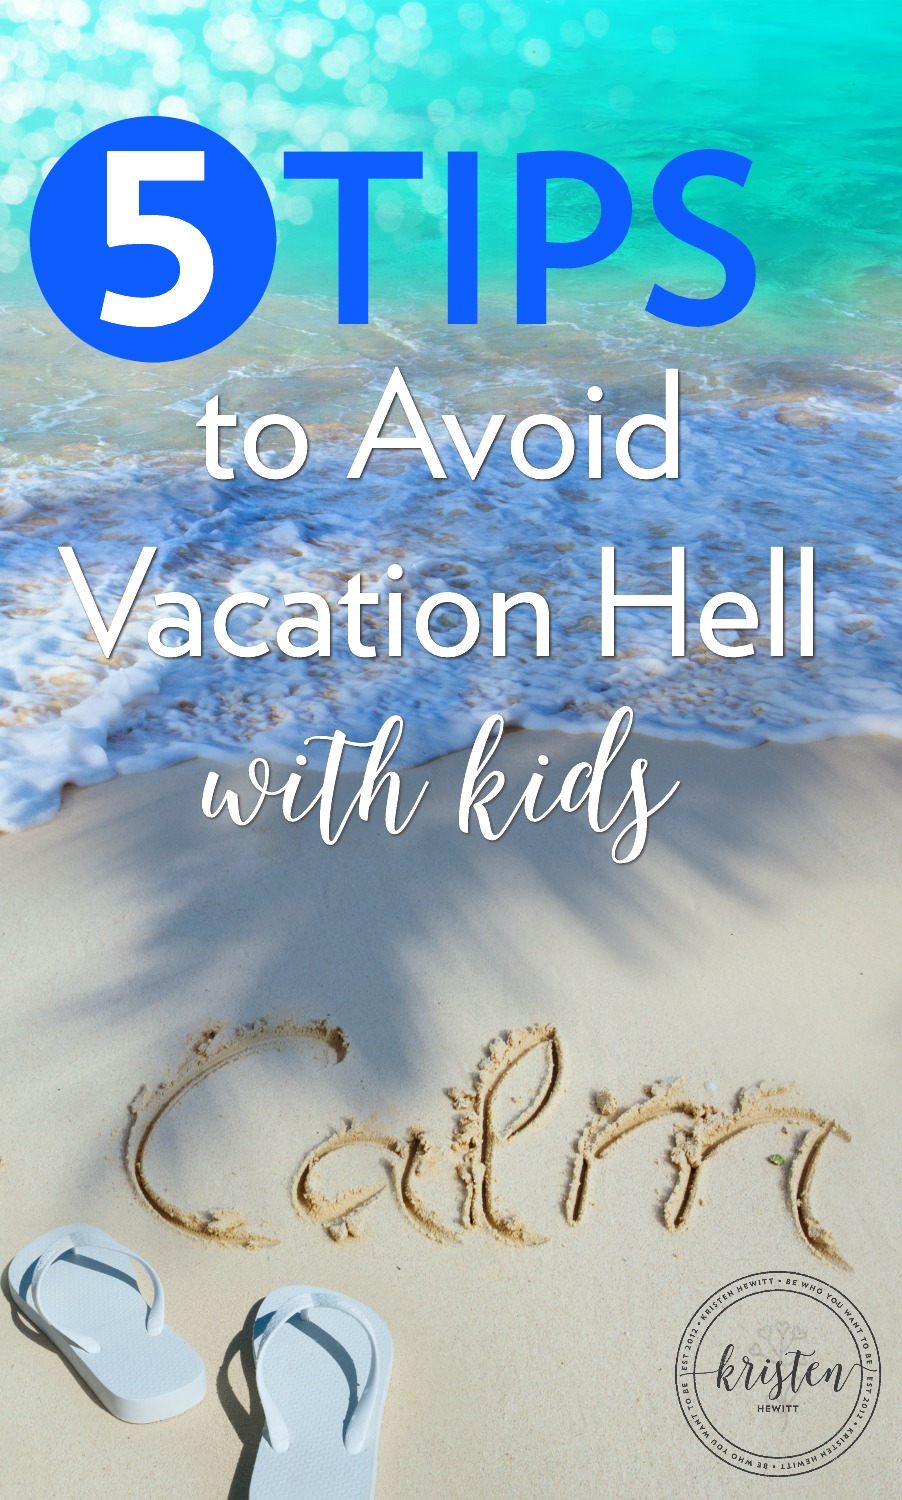 oing on a big trip with your kids? Follow these five tips to avoid vacation hell with kids, and have a great time! Good luck!